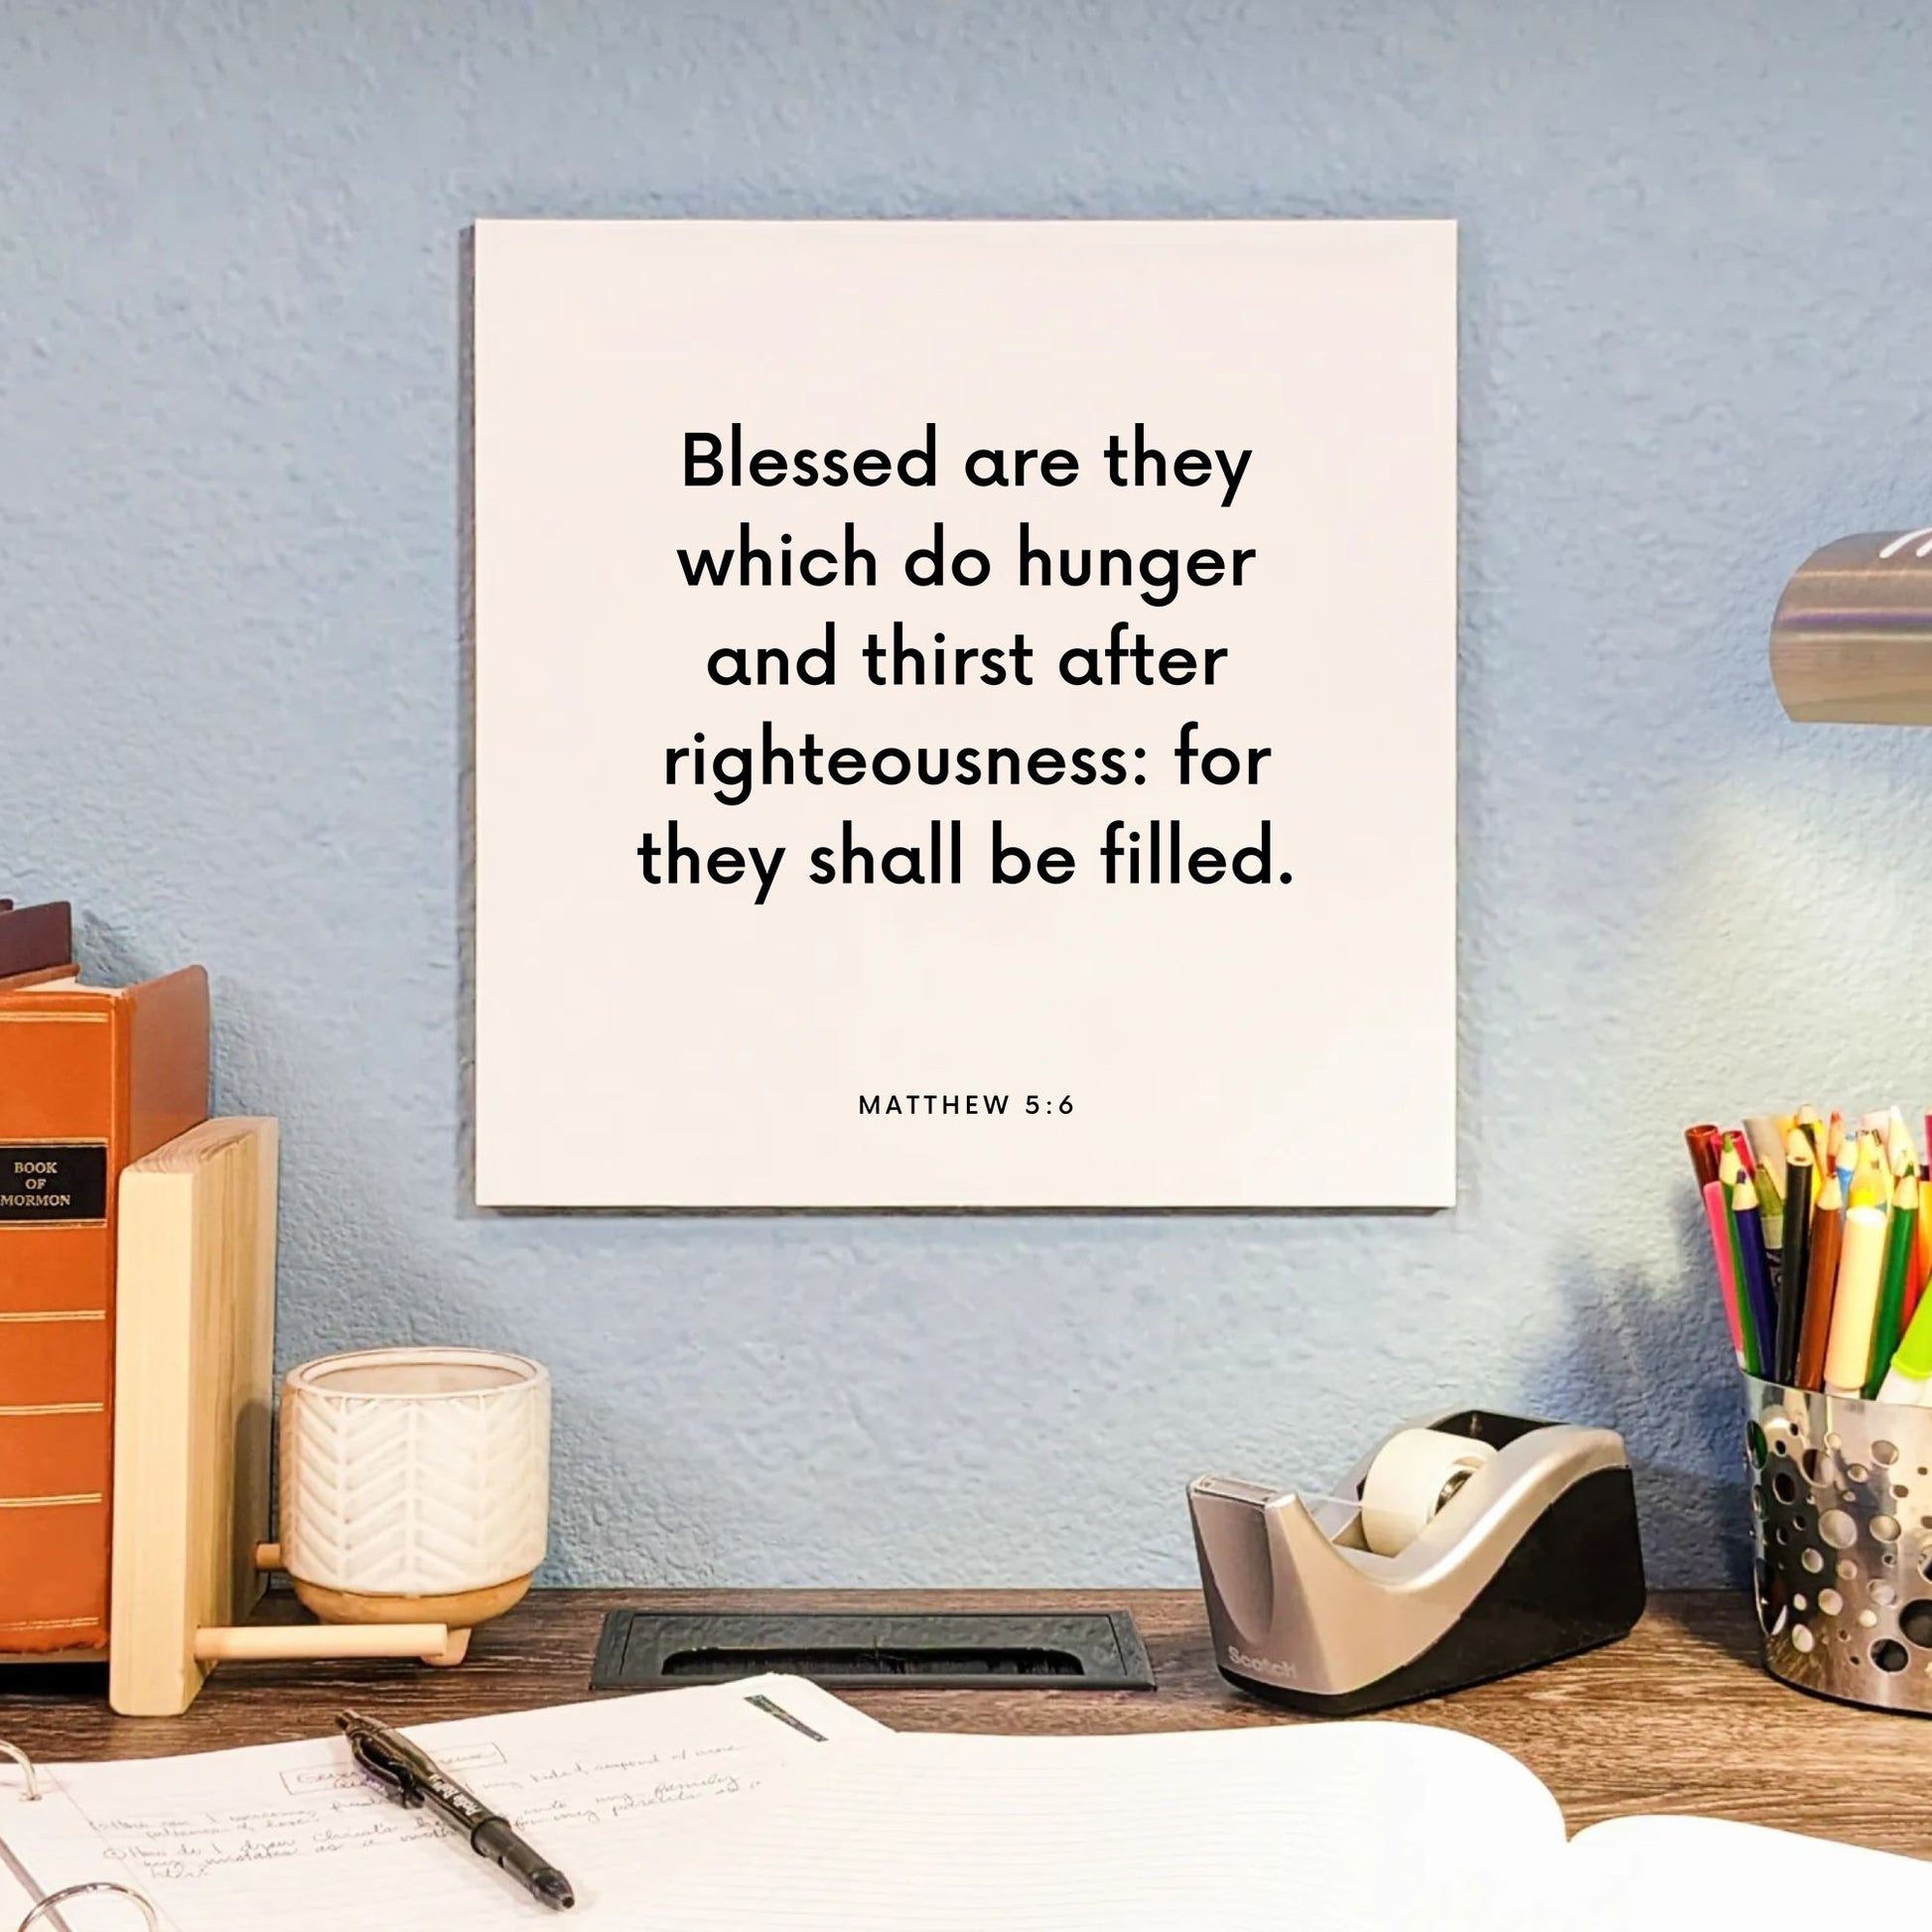 Desk mouting of the scripture tile for Matthew 5:6 - "Blessed are they which hunger and thirst after righteousness"